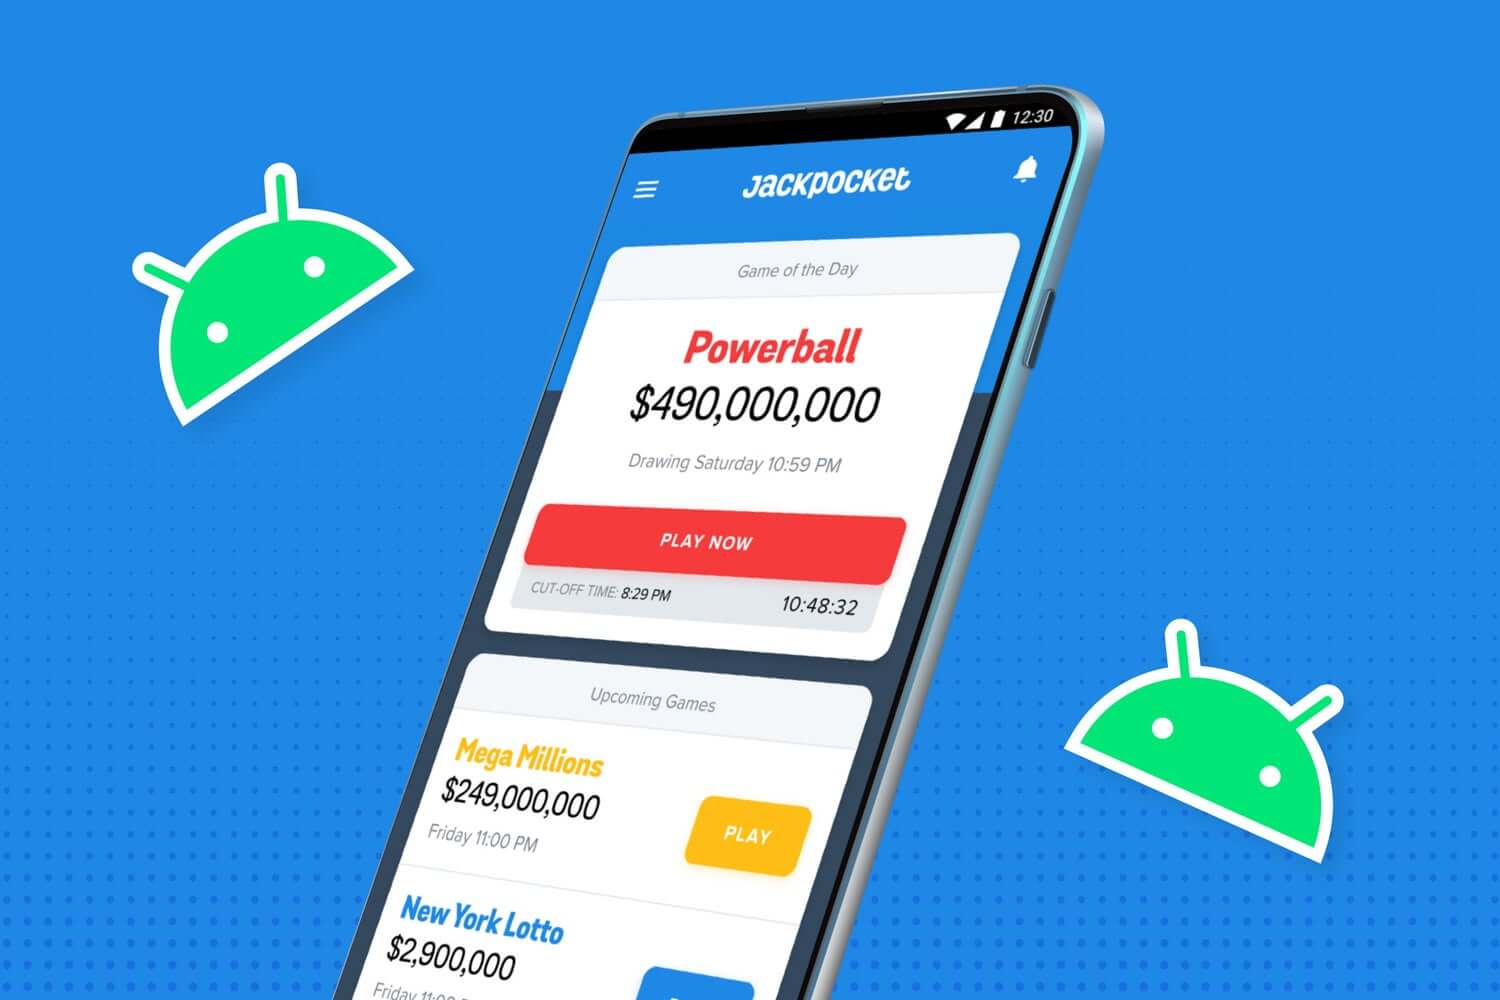 jackpocket android app